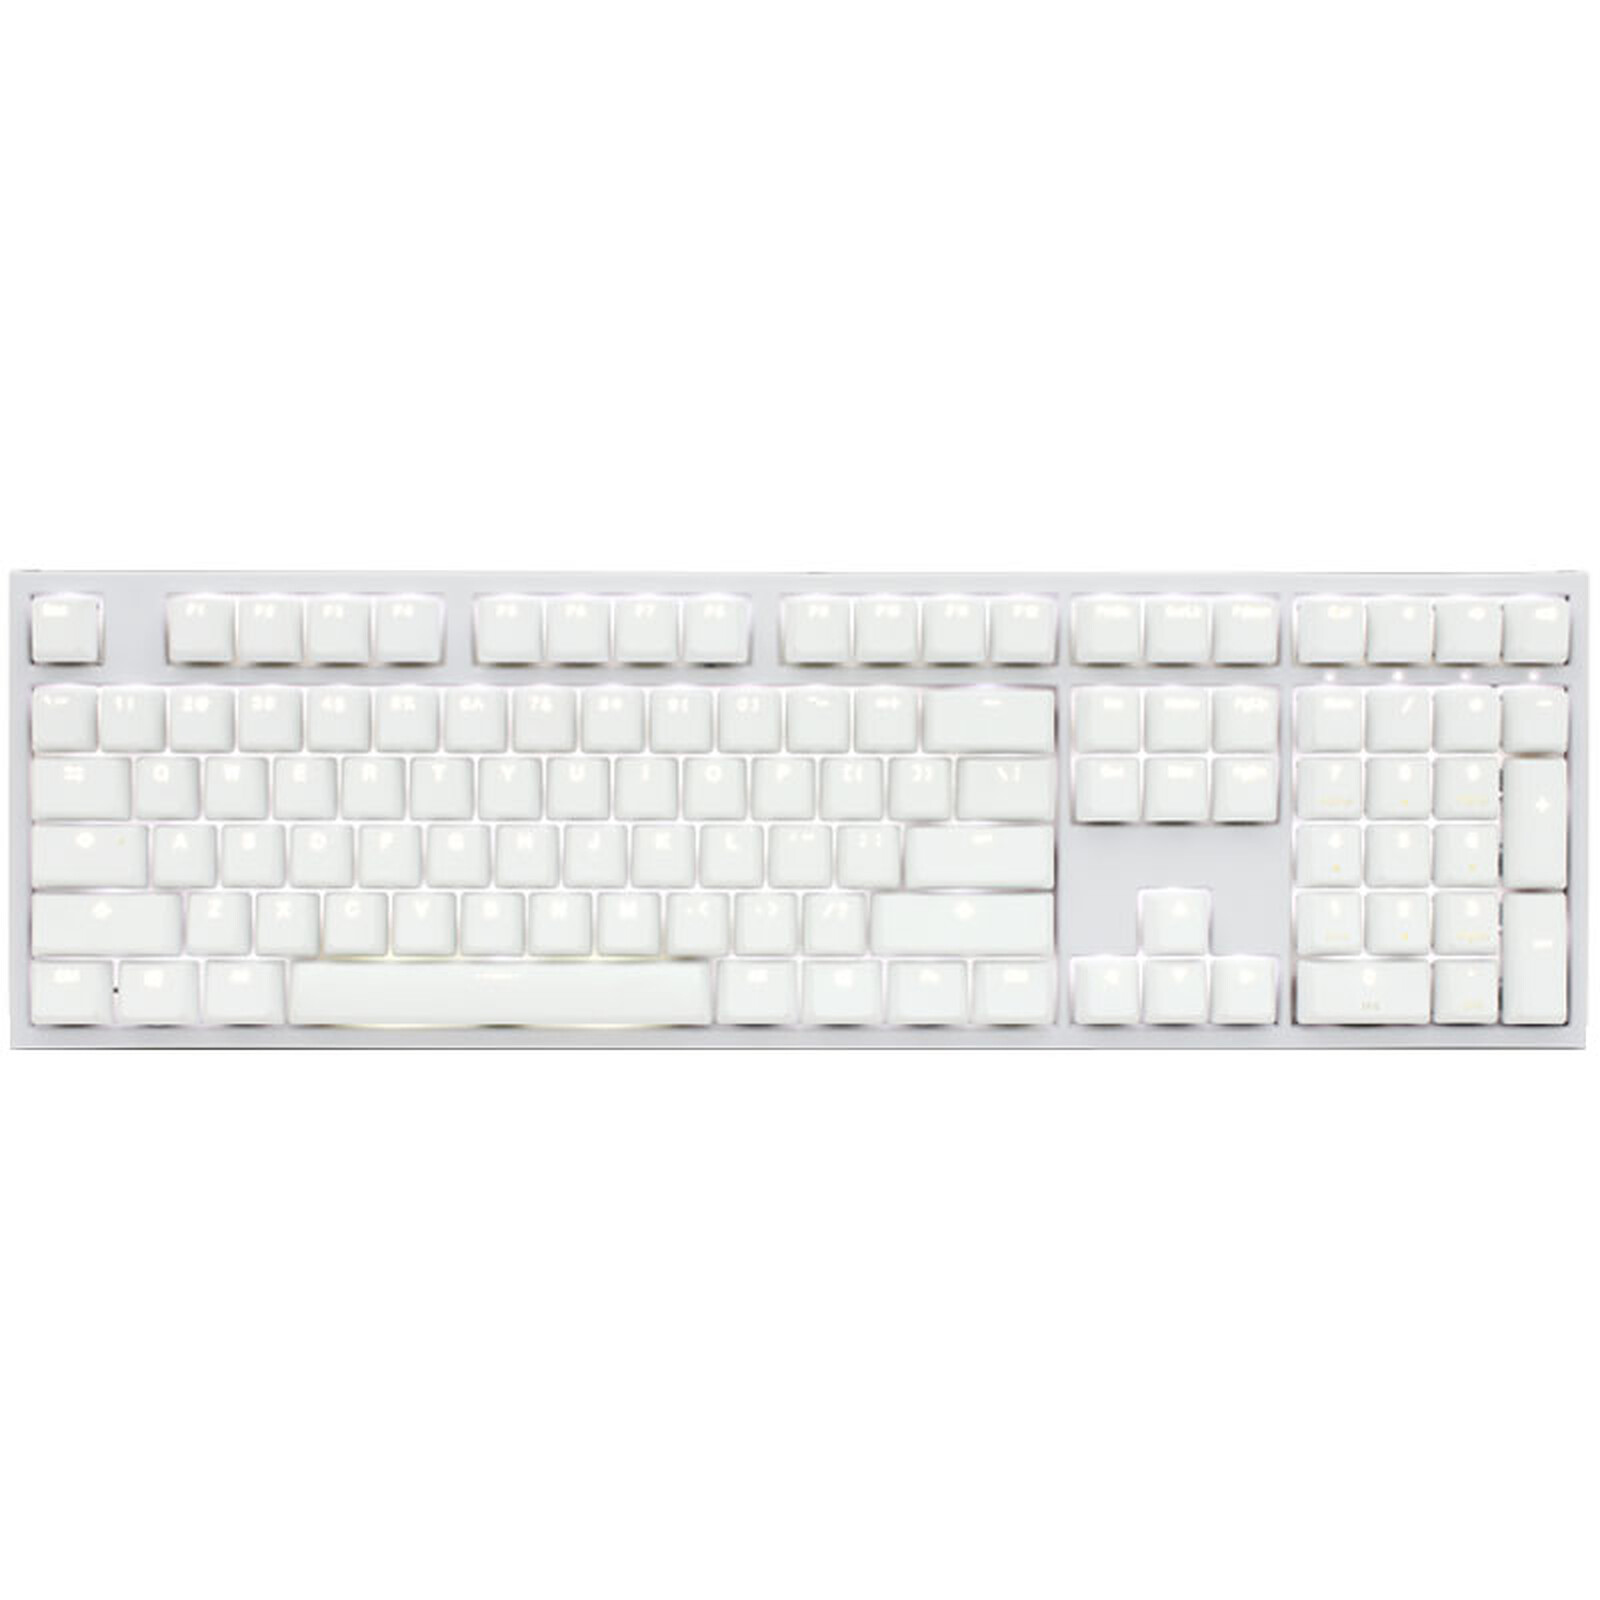 Ducky Channel One 2 Backlit (coloris blanc - Cherry MX Blue - LEDs blanches)